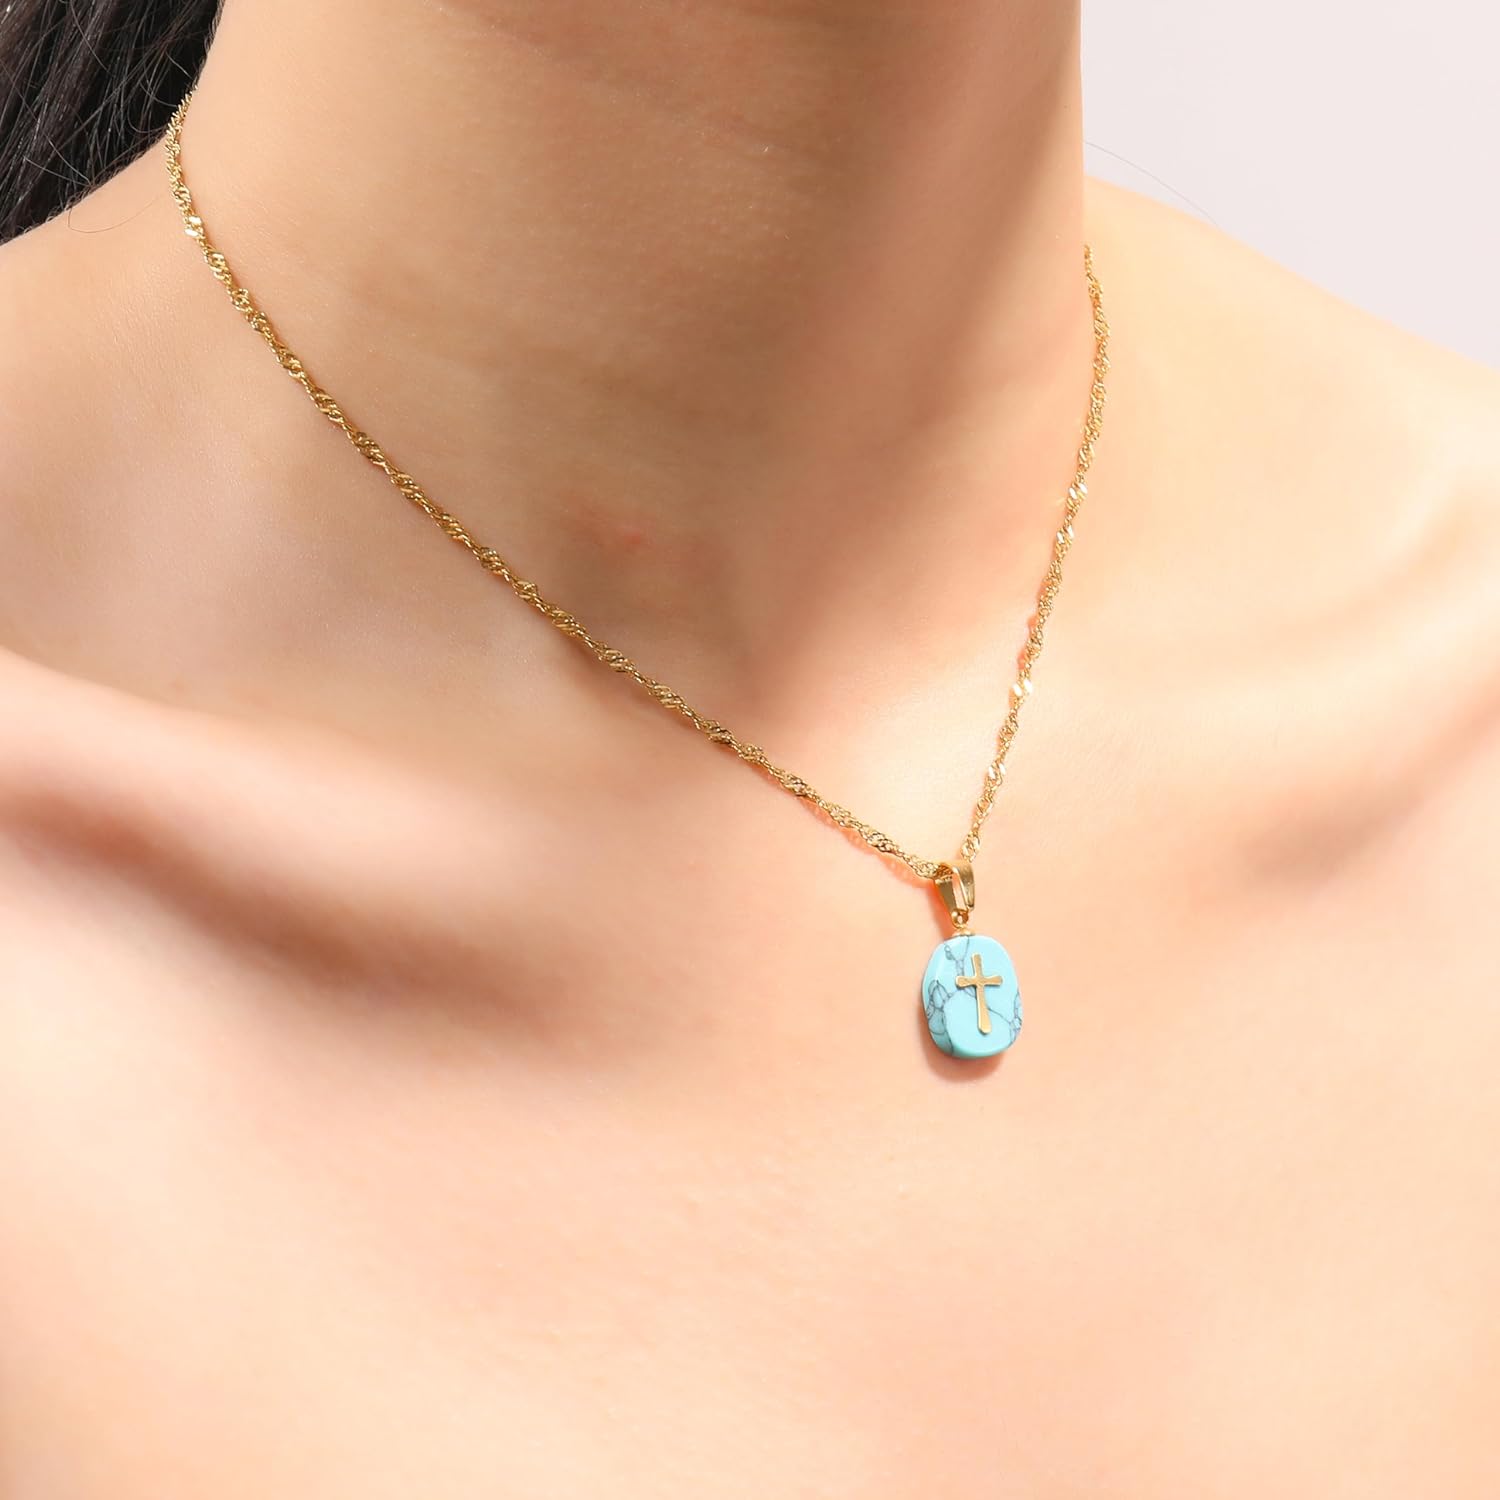 Stainless Steel Clavicle Chain Necklace with Natural Blue Sapphire Stone Cross Pendant, for Women & Men Nazareth Store